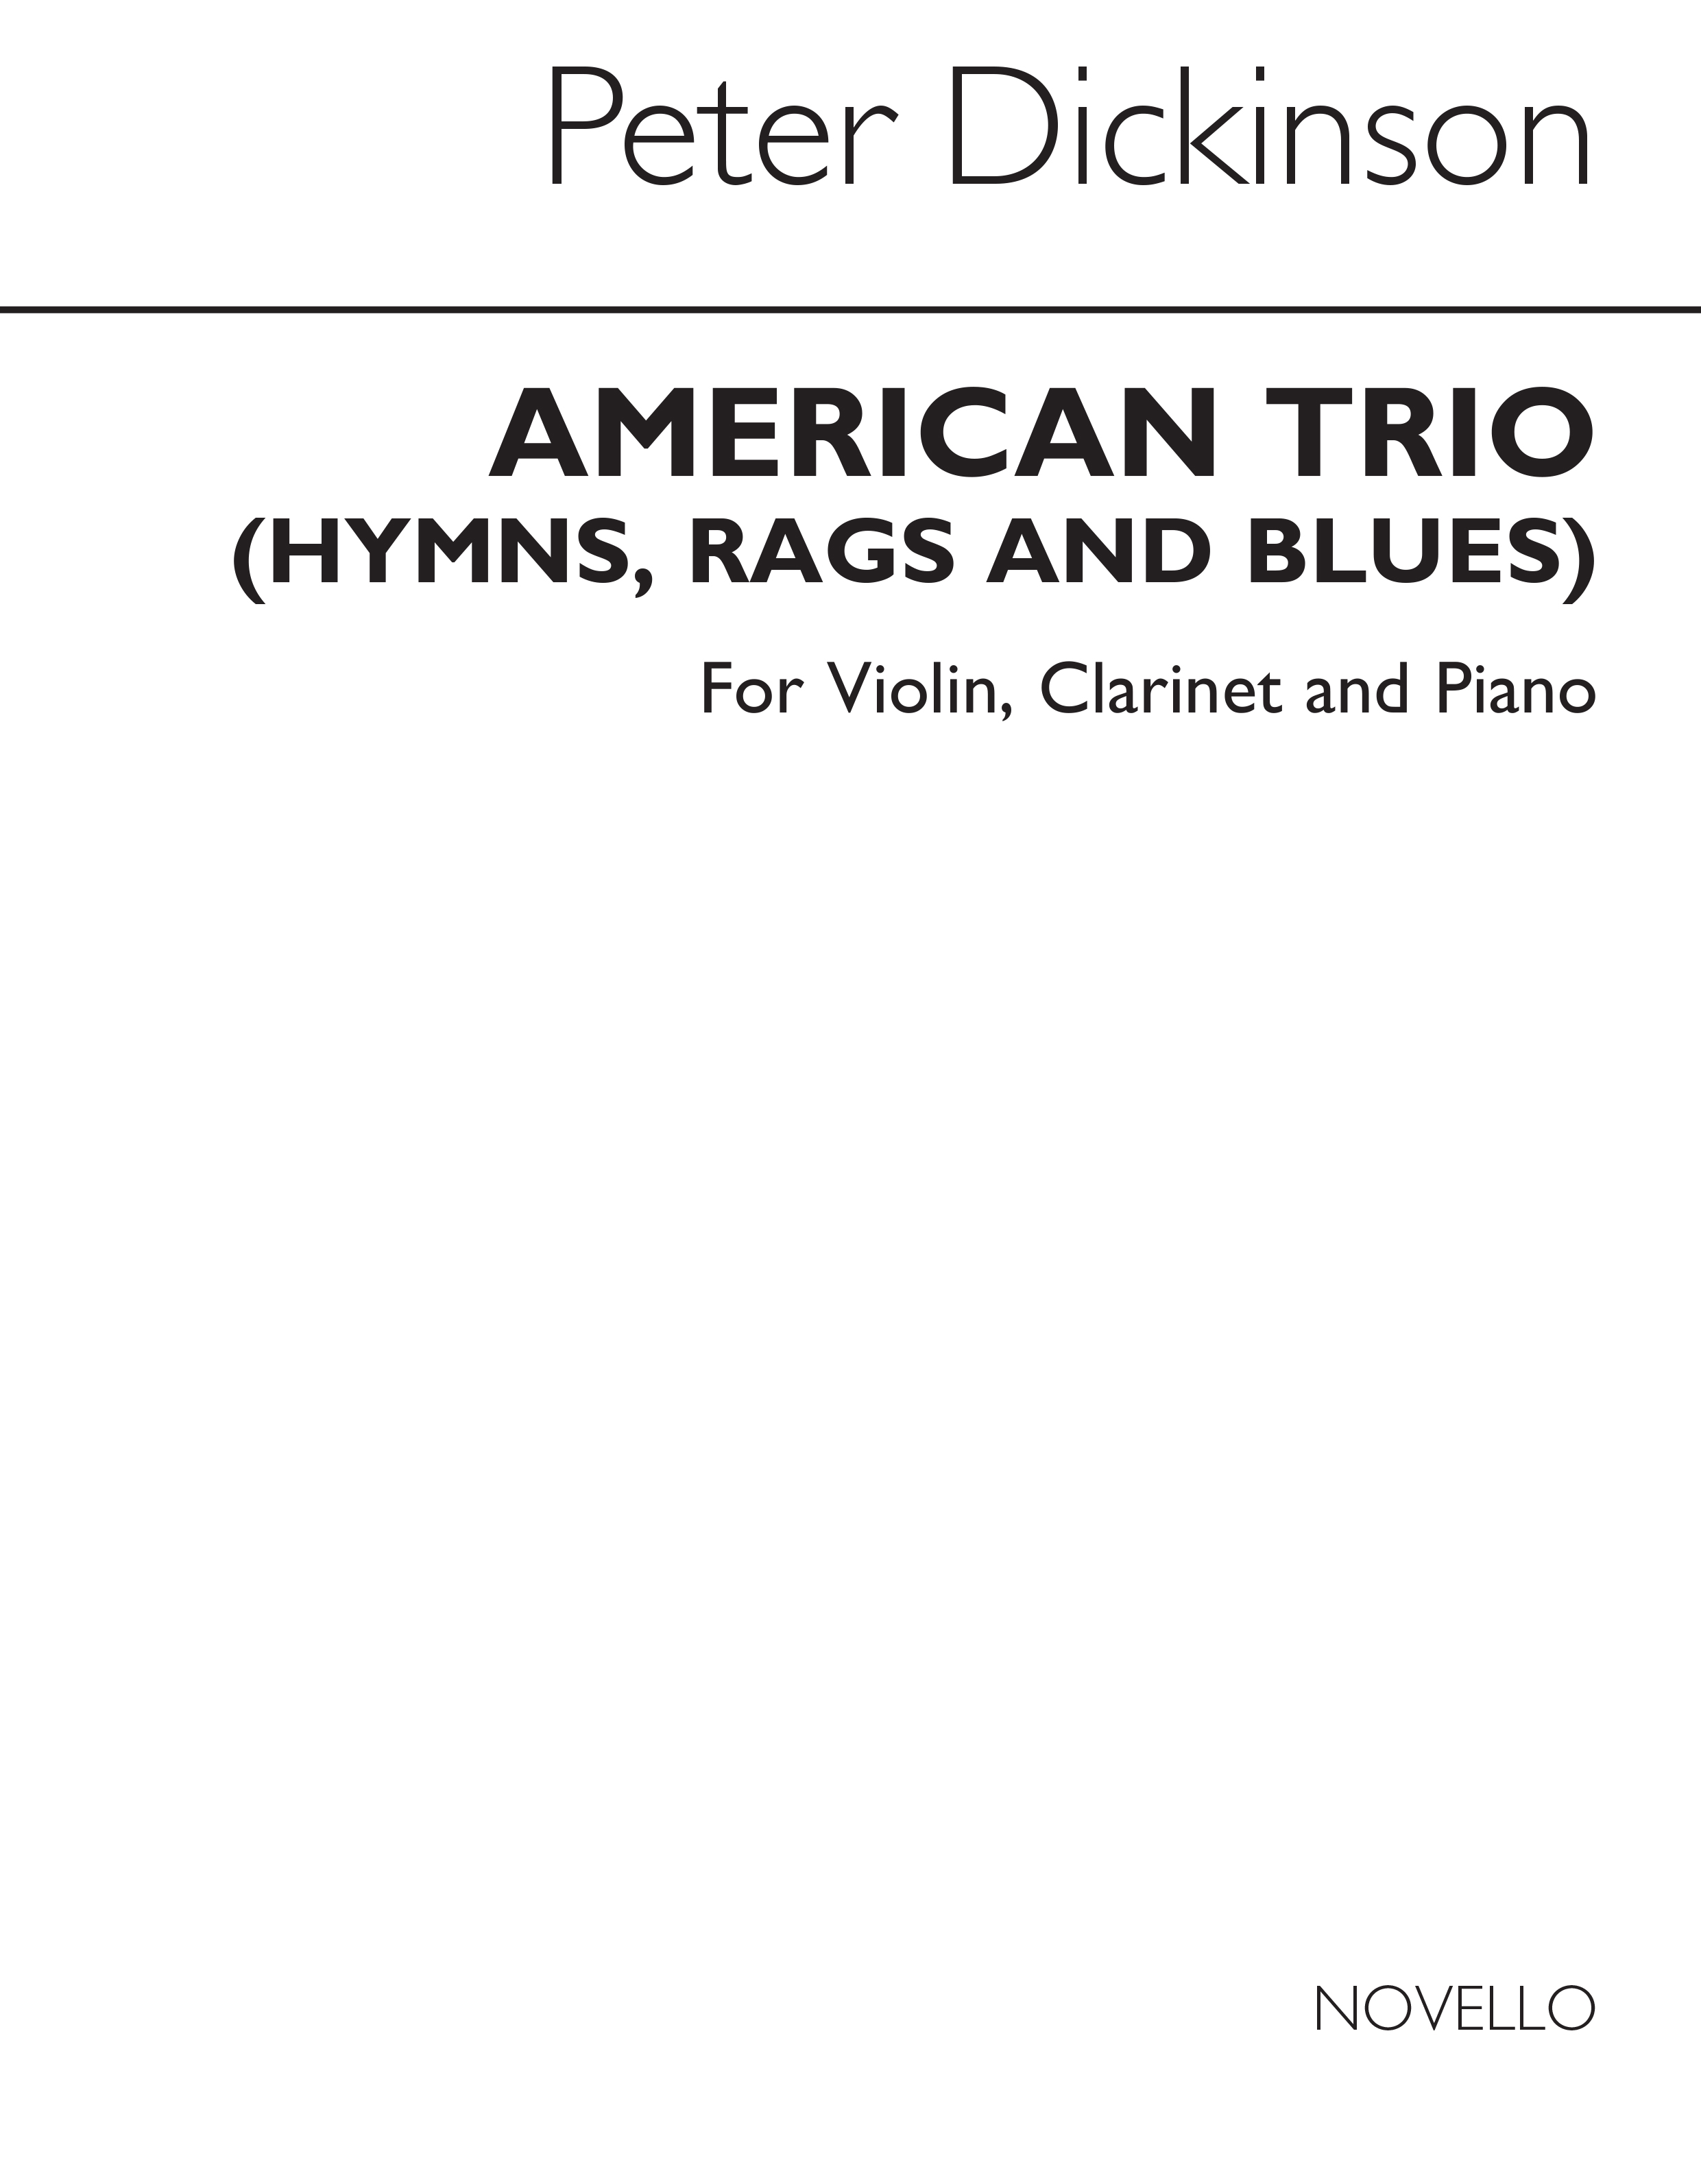 Peter Dickinson: American Trio [Hymns Rags And Blues]: Chamber Ensemble: Score